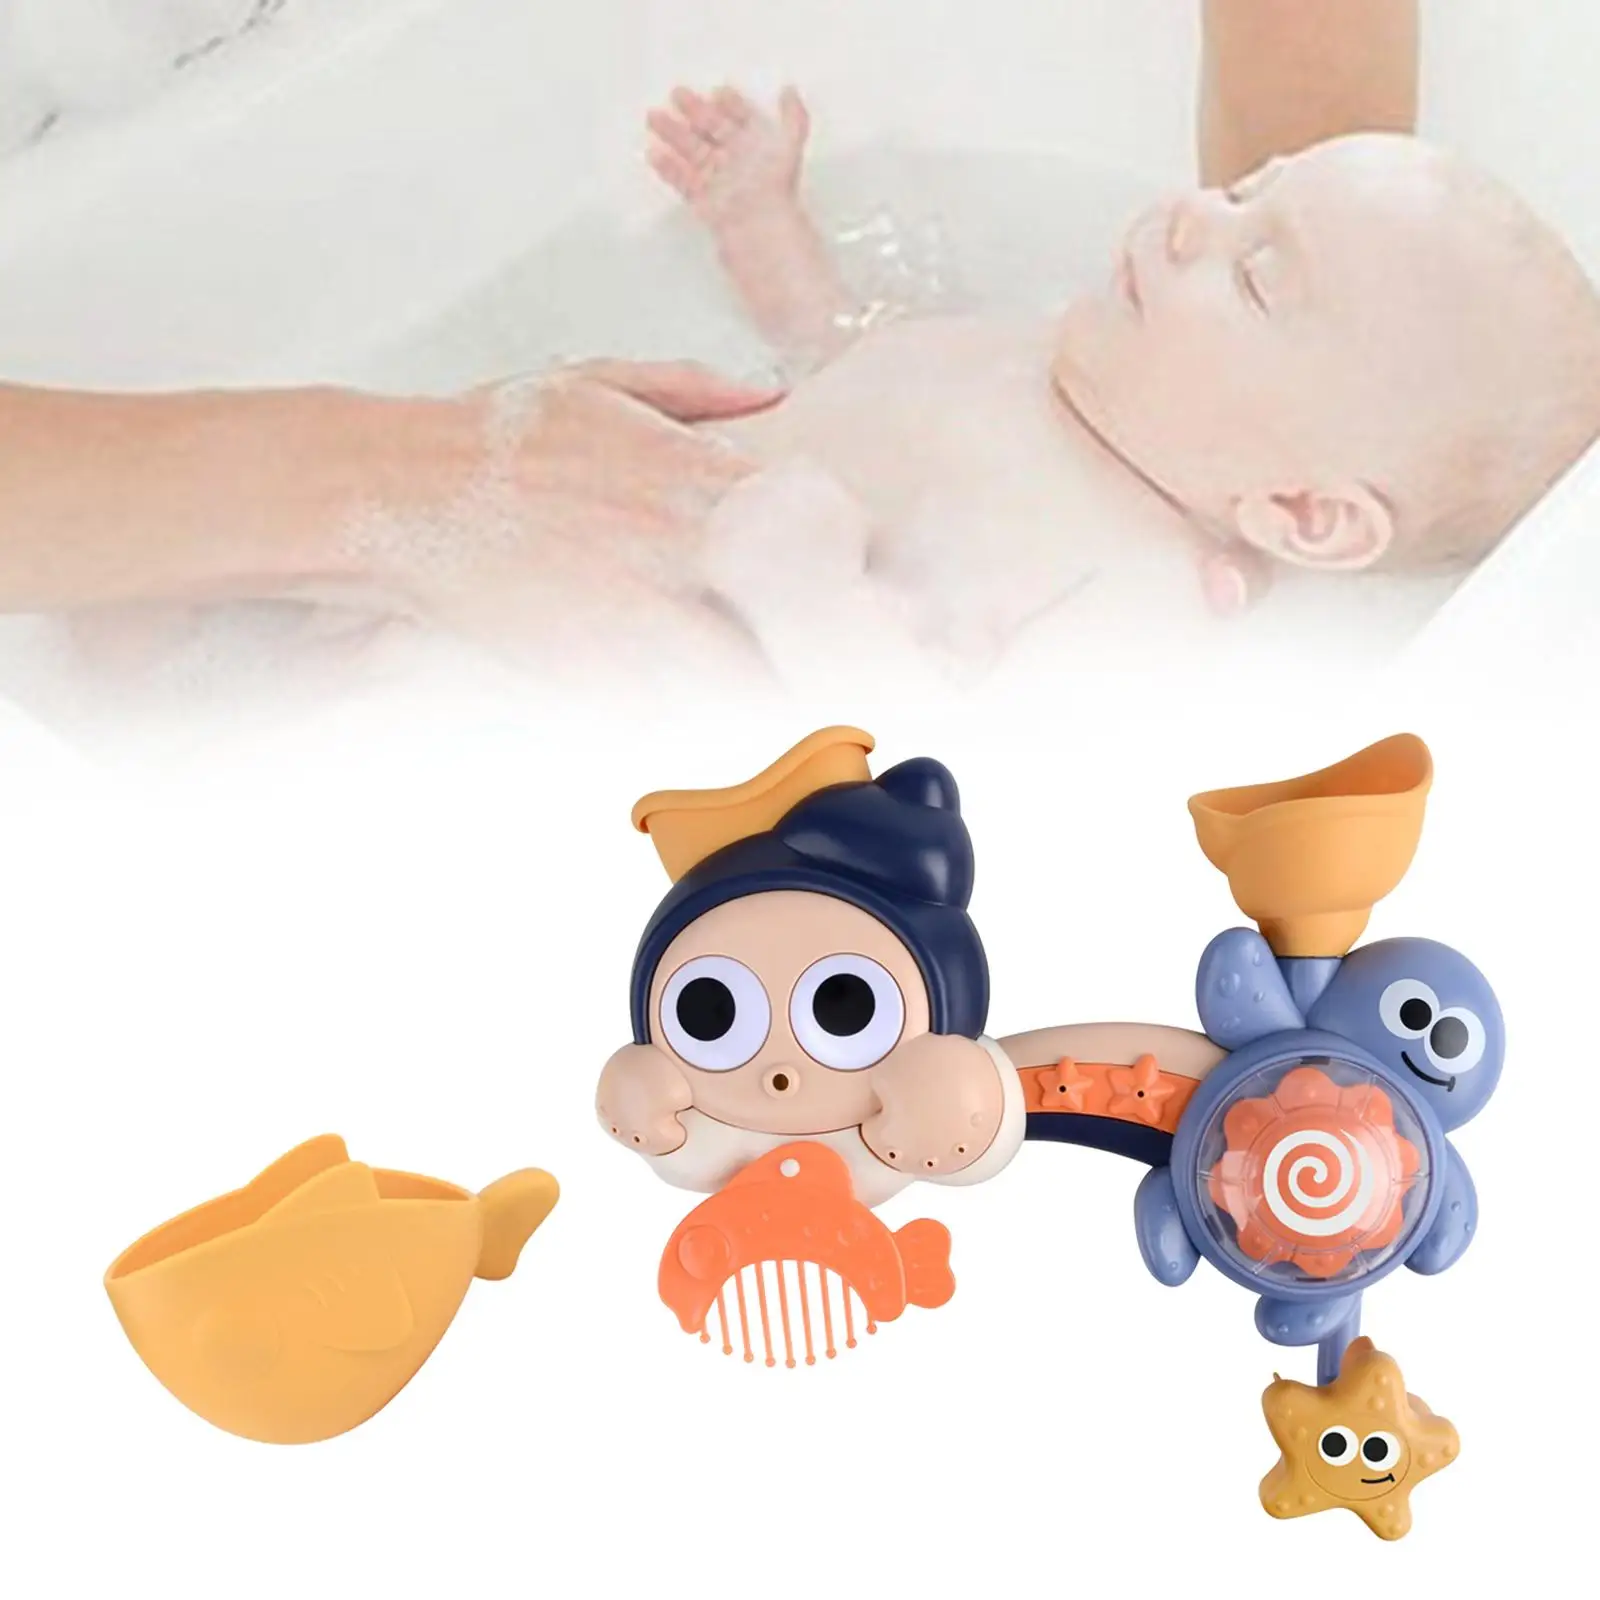 Baby Bath Toys with Suction Cup Bathroom Toys for Boys Girls Toddlers Infant